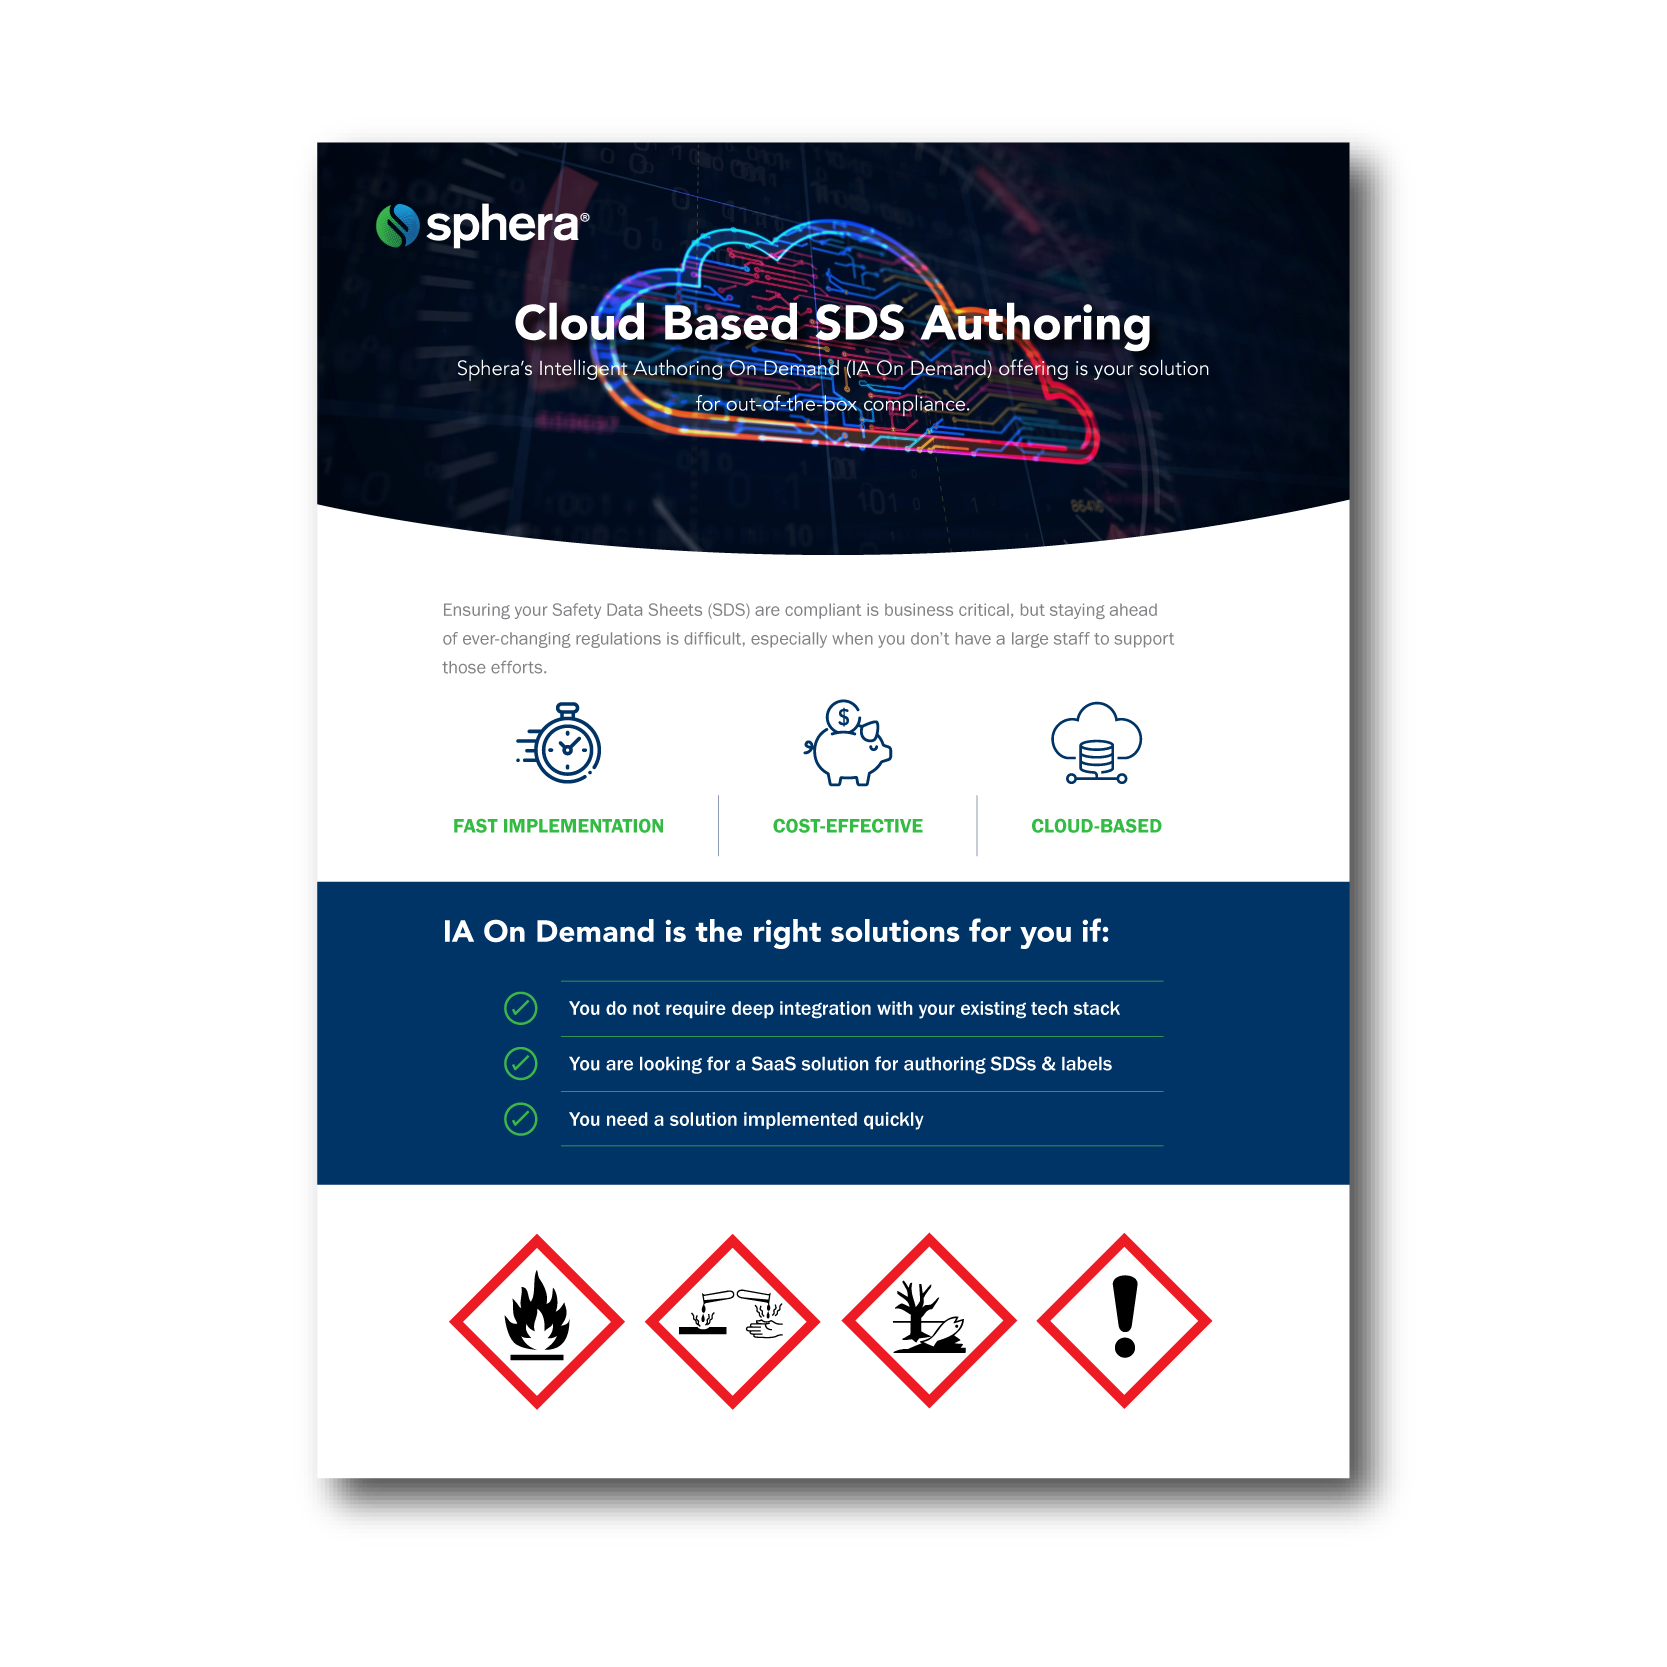 Cloud Based SDS Authoring